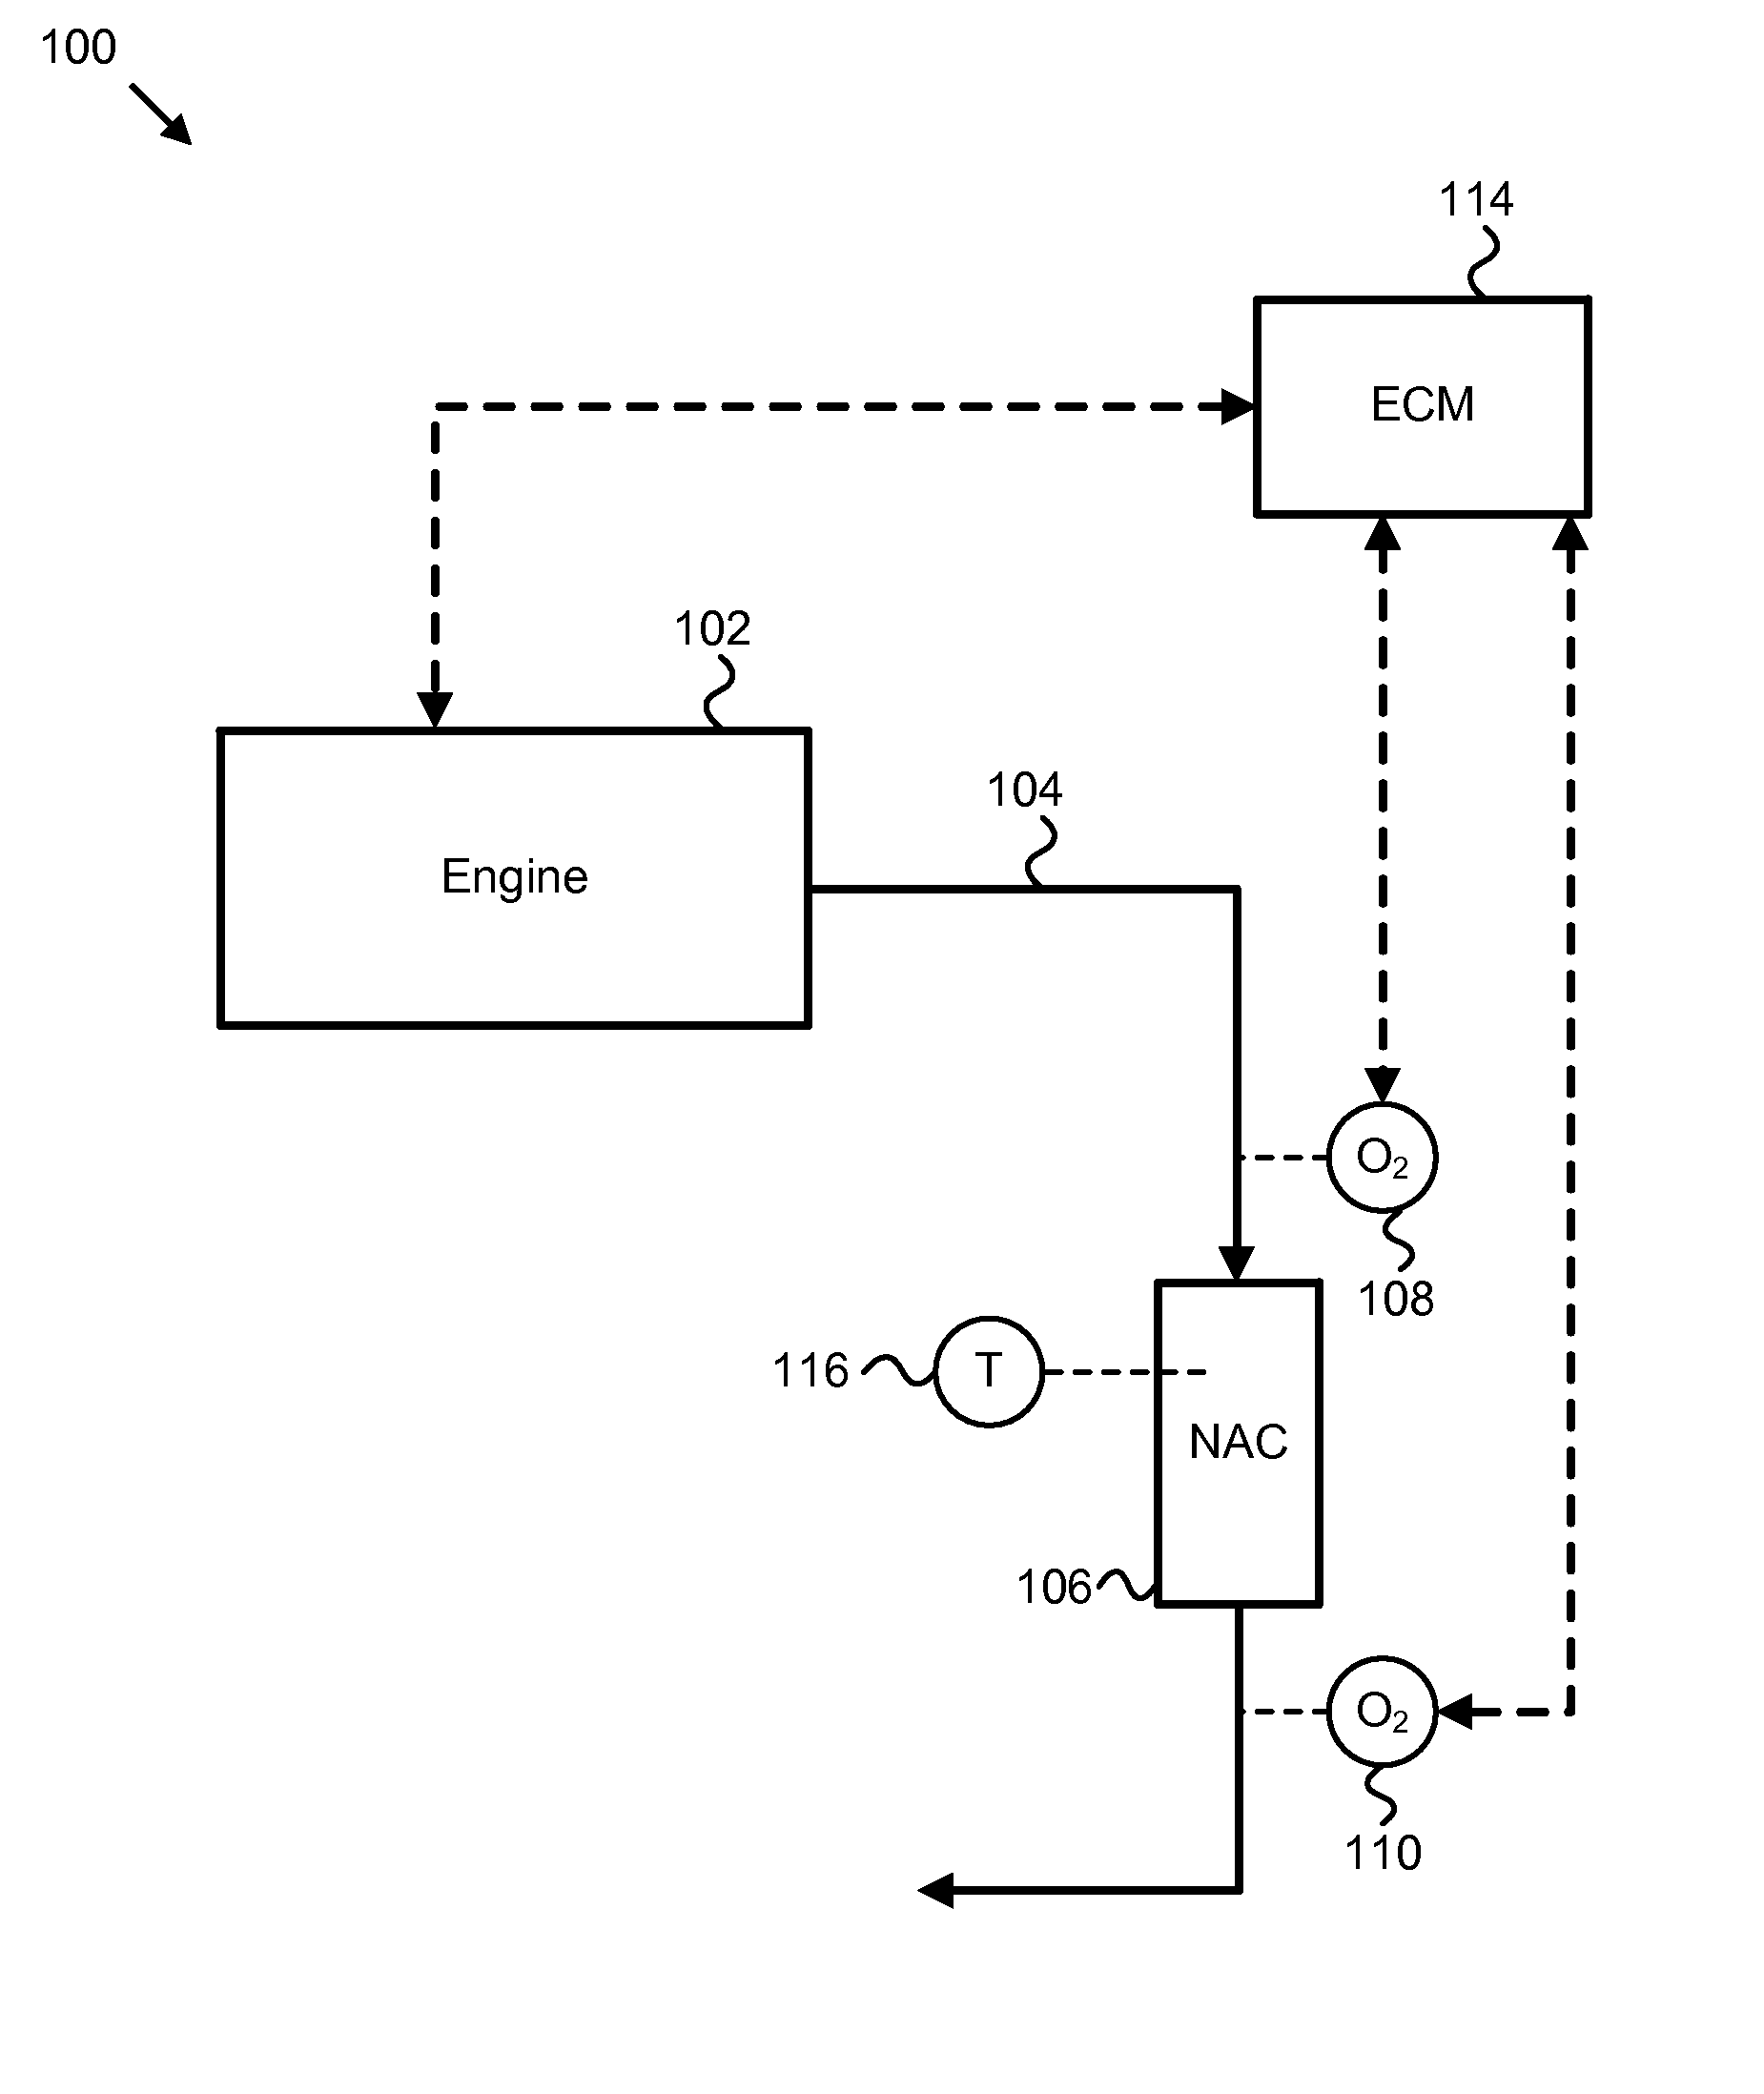 Apparatus, system, and method for real-time diagnosis of a NOx-adsorption catalyst